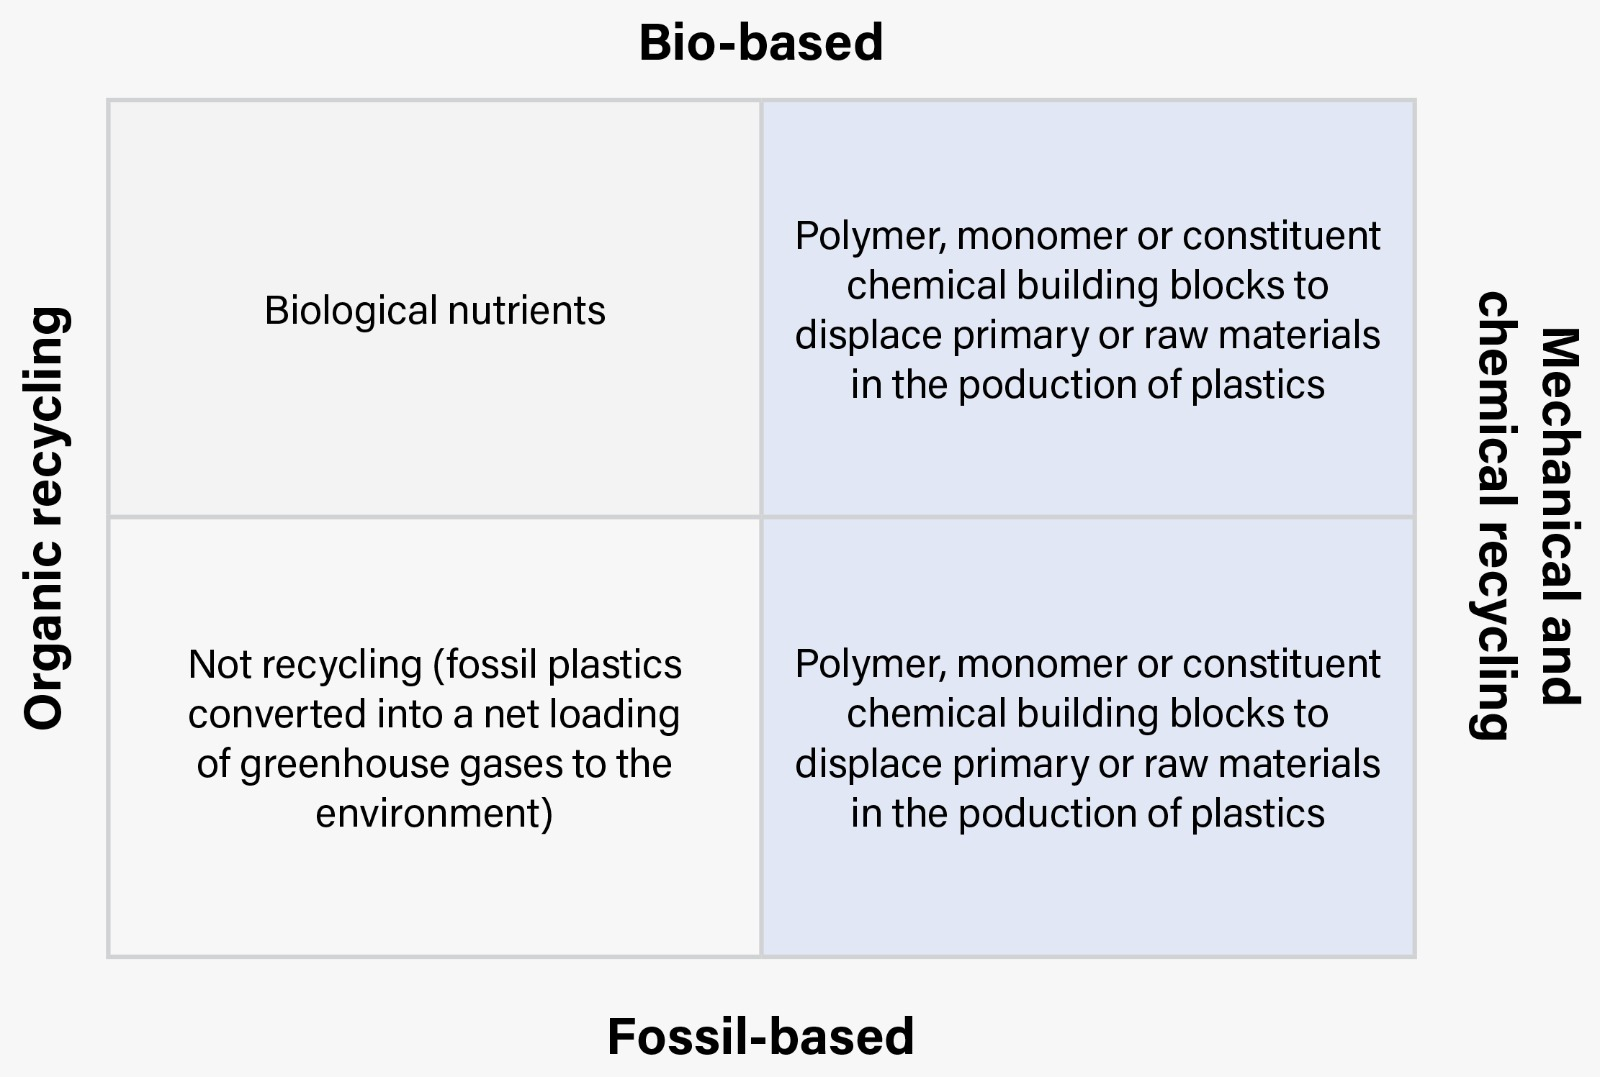 A square with four quadrants is depicted. The left-hand quadrants represent organic recycling. The right-hand quadrants represent mechanical and chemical recycling. The upper quadrants represent bio-based recycling. The lower quadrants represent fossil-based recycling. Long description: Text within the quadrants are as follows: Upper left (bio-based, organic recycling) = biological nutrients. This quadrant is shaded green. Lower left (fossil-based, organic recycling) = not recycling (fossil plastics converted into a net loading of greenhouse gases to the environment). Upper right (bio-based, mechanical and chemical recycling) and lower right (fossil-based, mechanical and chemical recycling) = polymer, monomer or constituent chemical building blocks to displace primary or raw materials in the production of plastics. These quadrants are shaded blue.